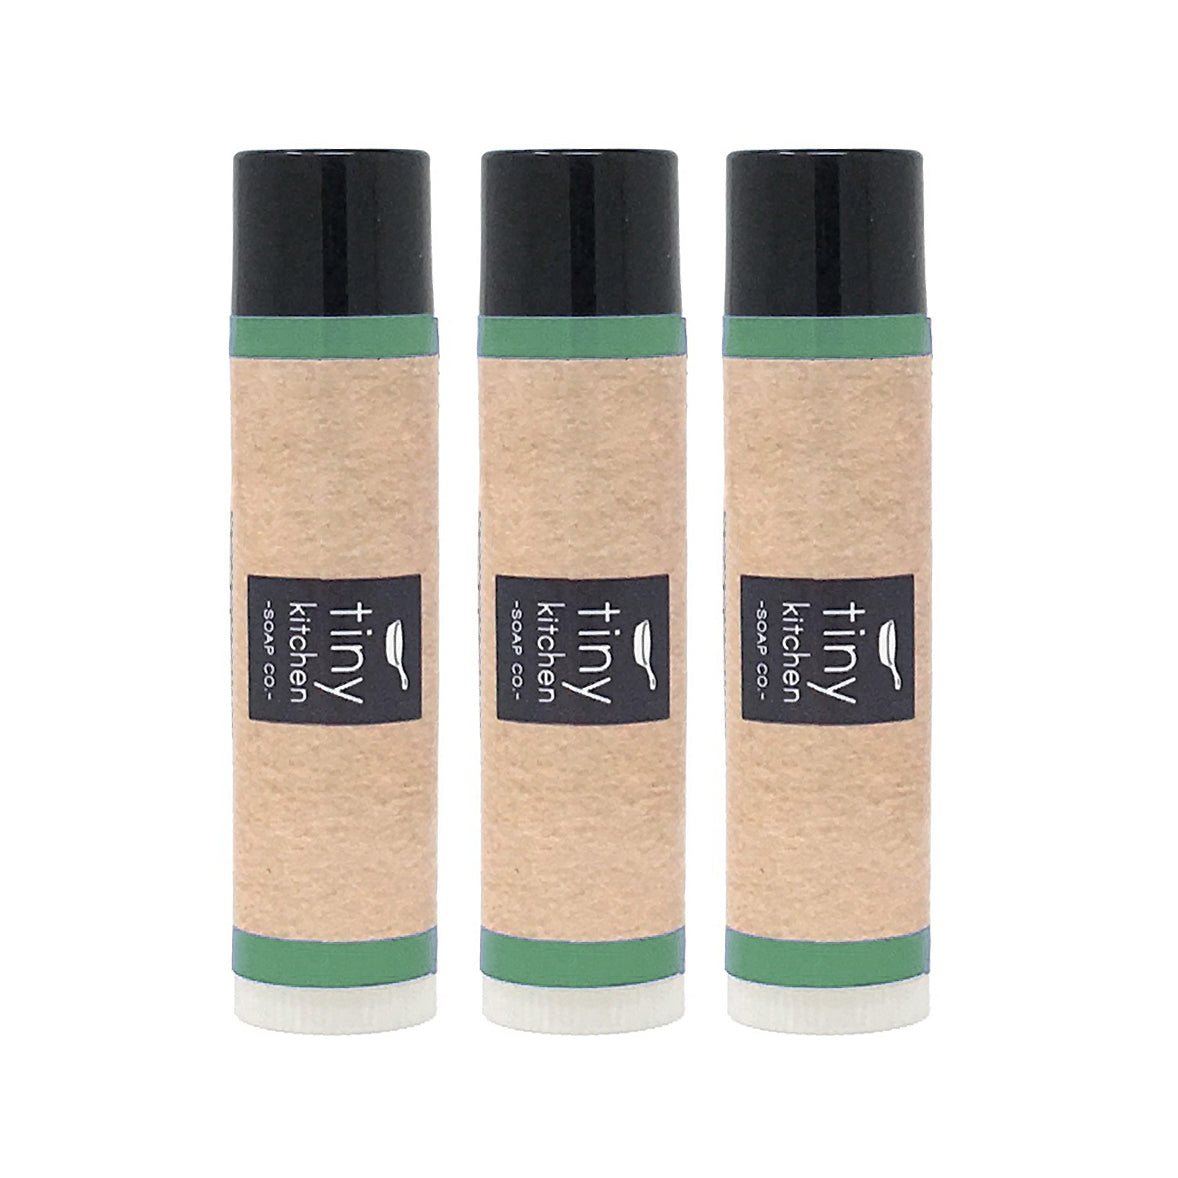 Rosemary Mint All Natural Beeswax Lip Balm - 3 PACK